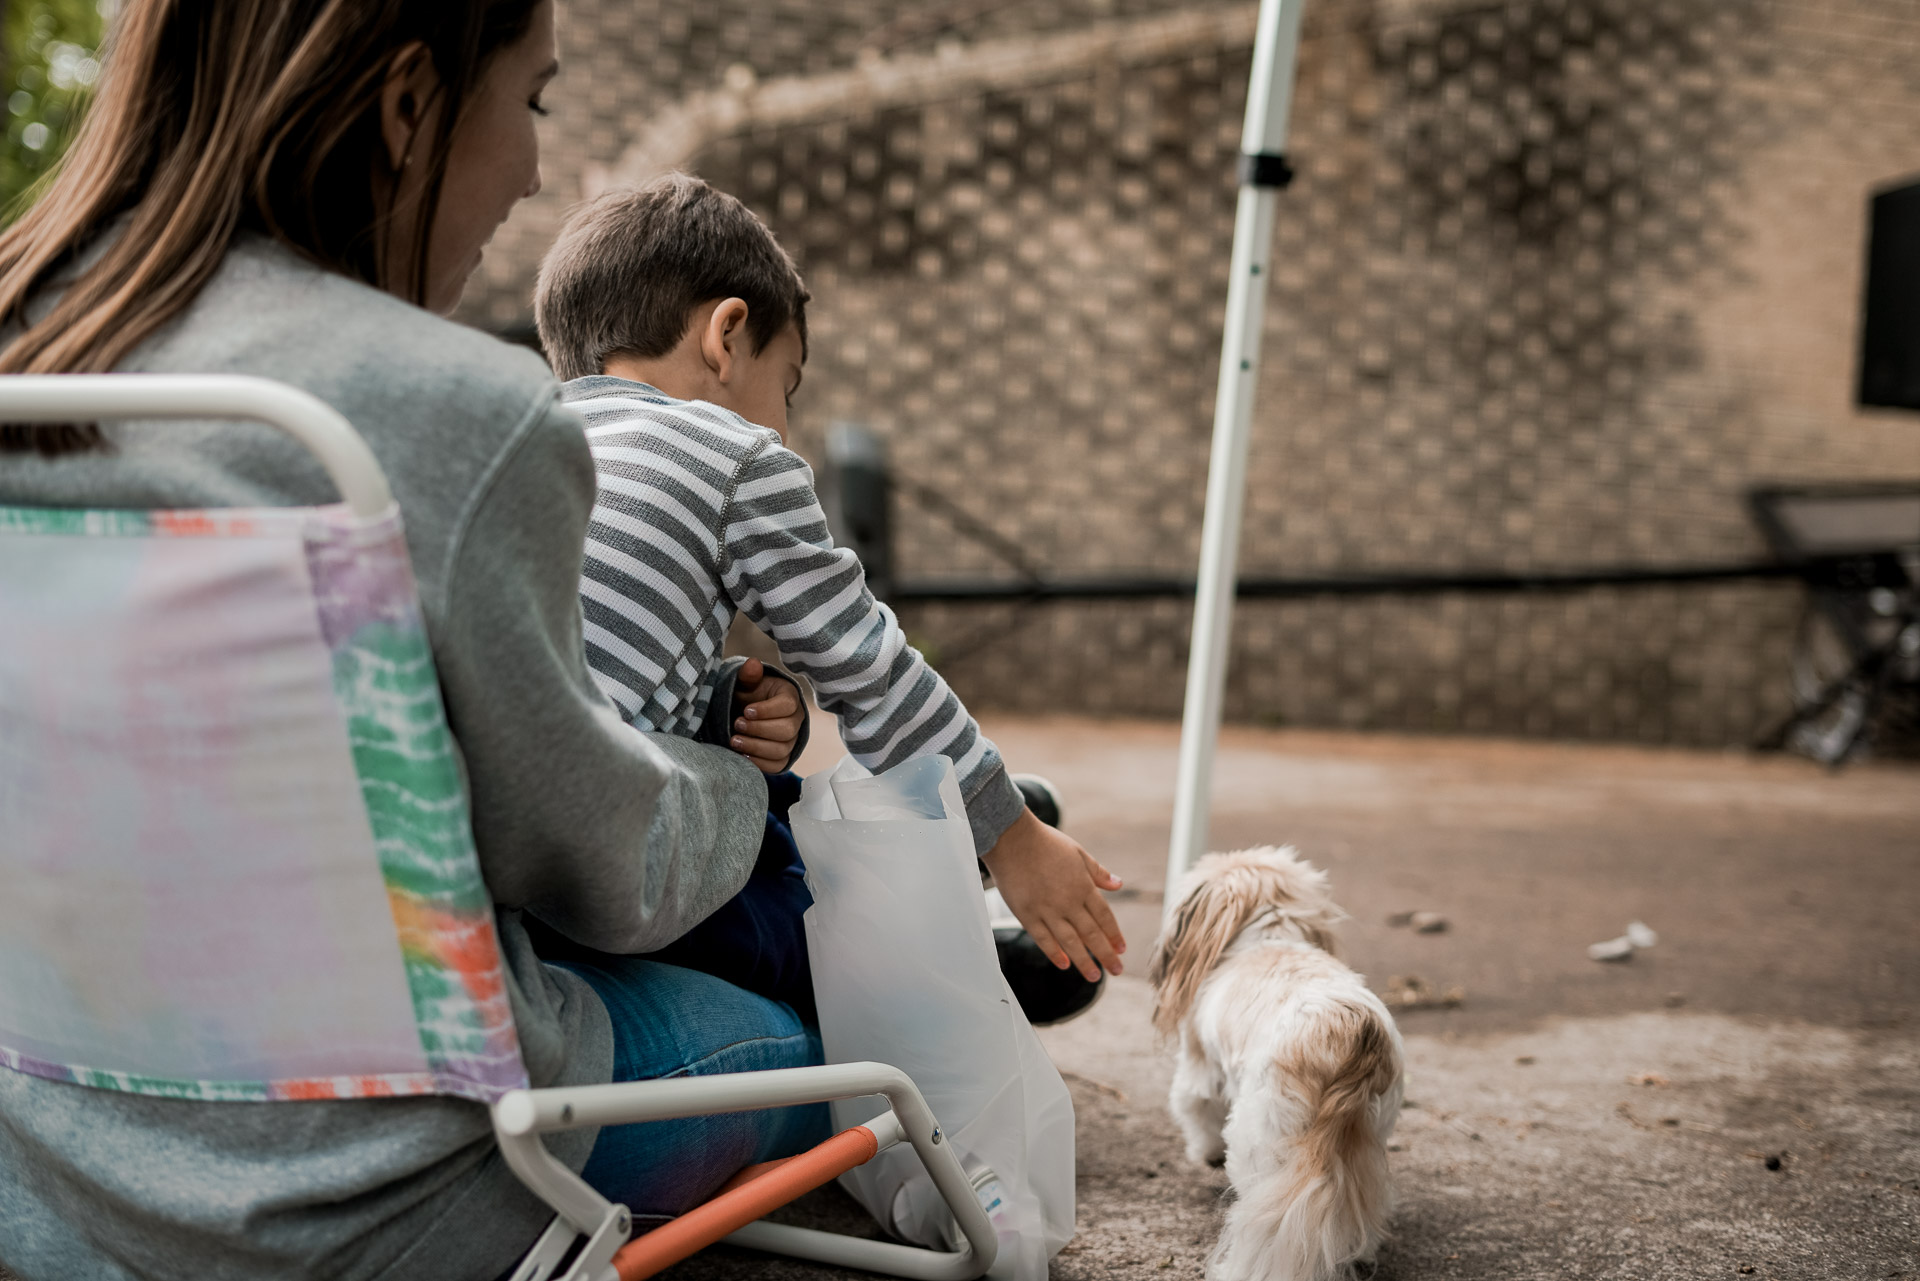 A woman and child sitting, hand reached out to pet a small dog